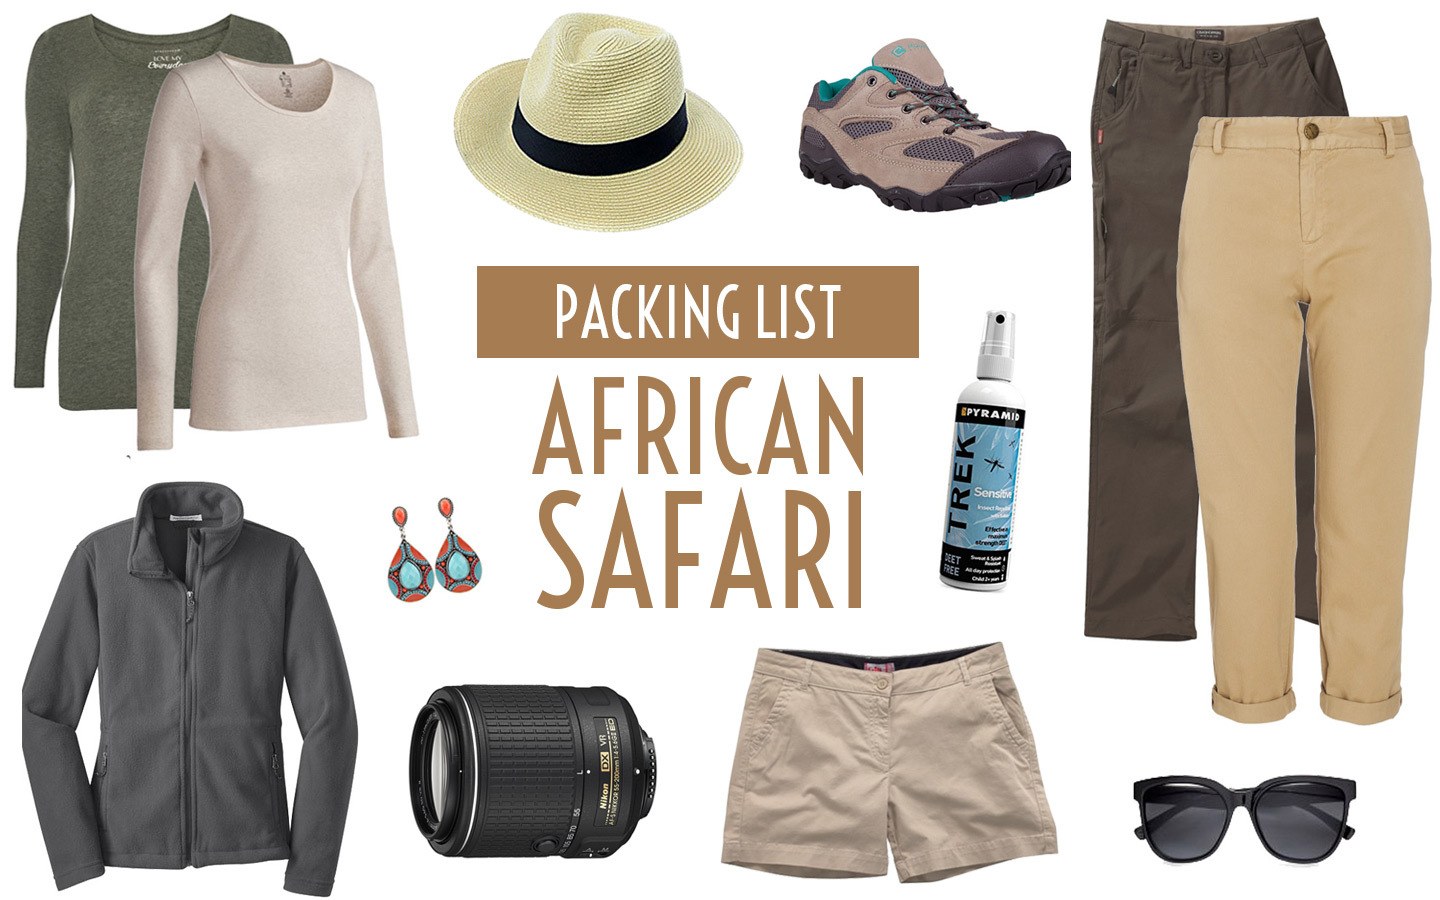 What to pack for a great African safari?